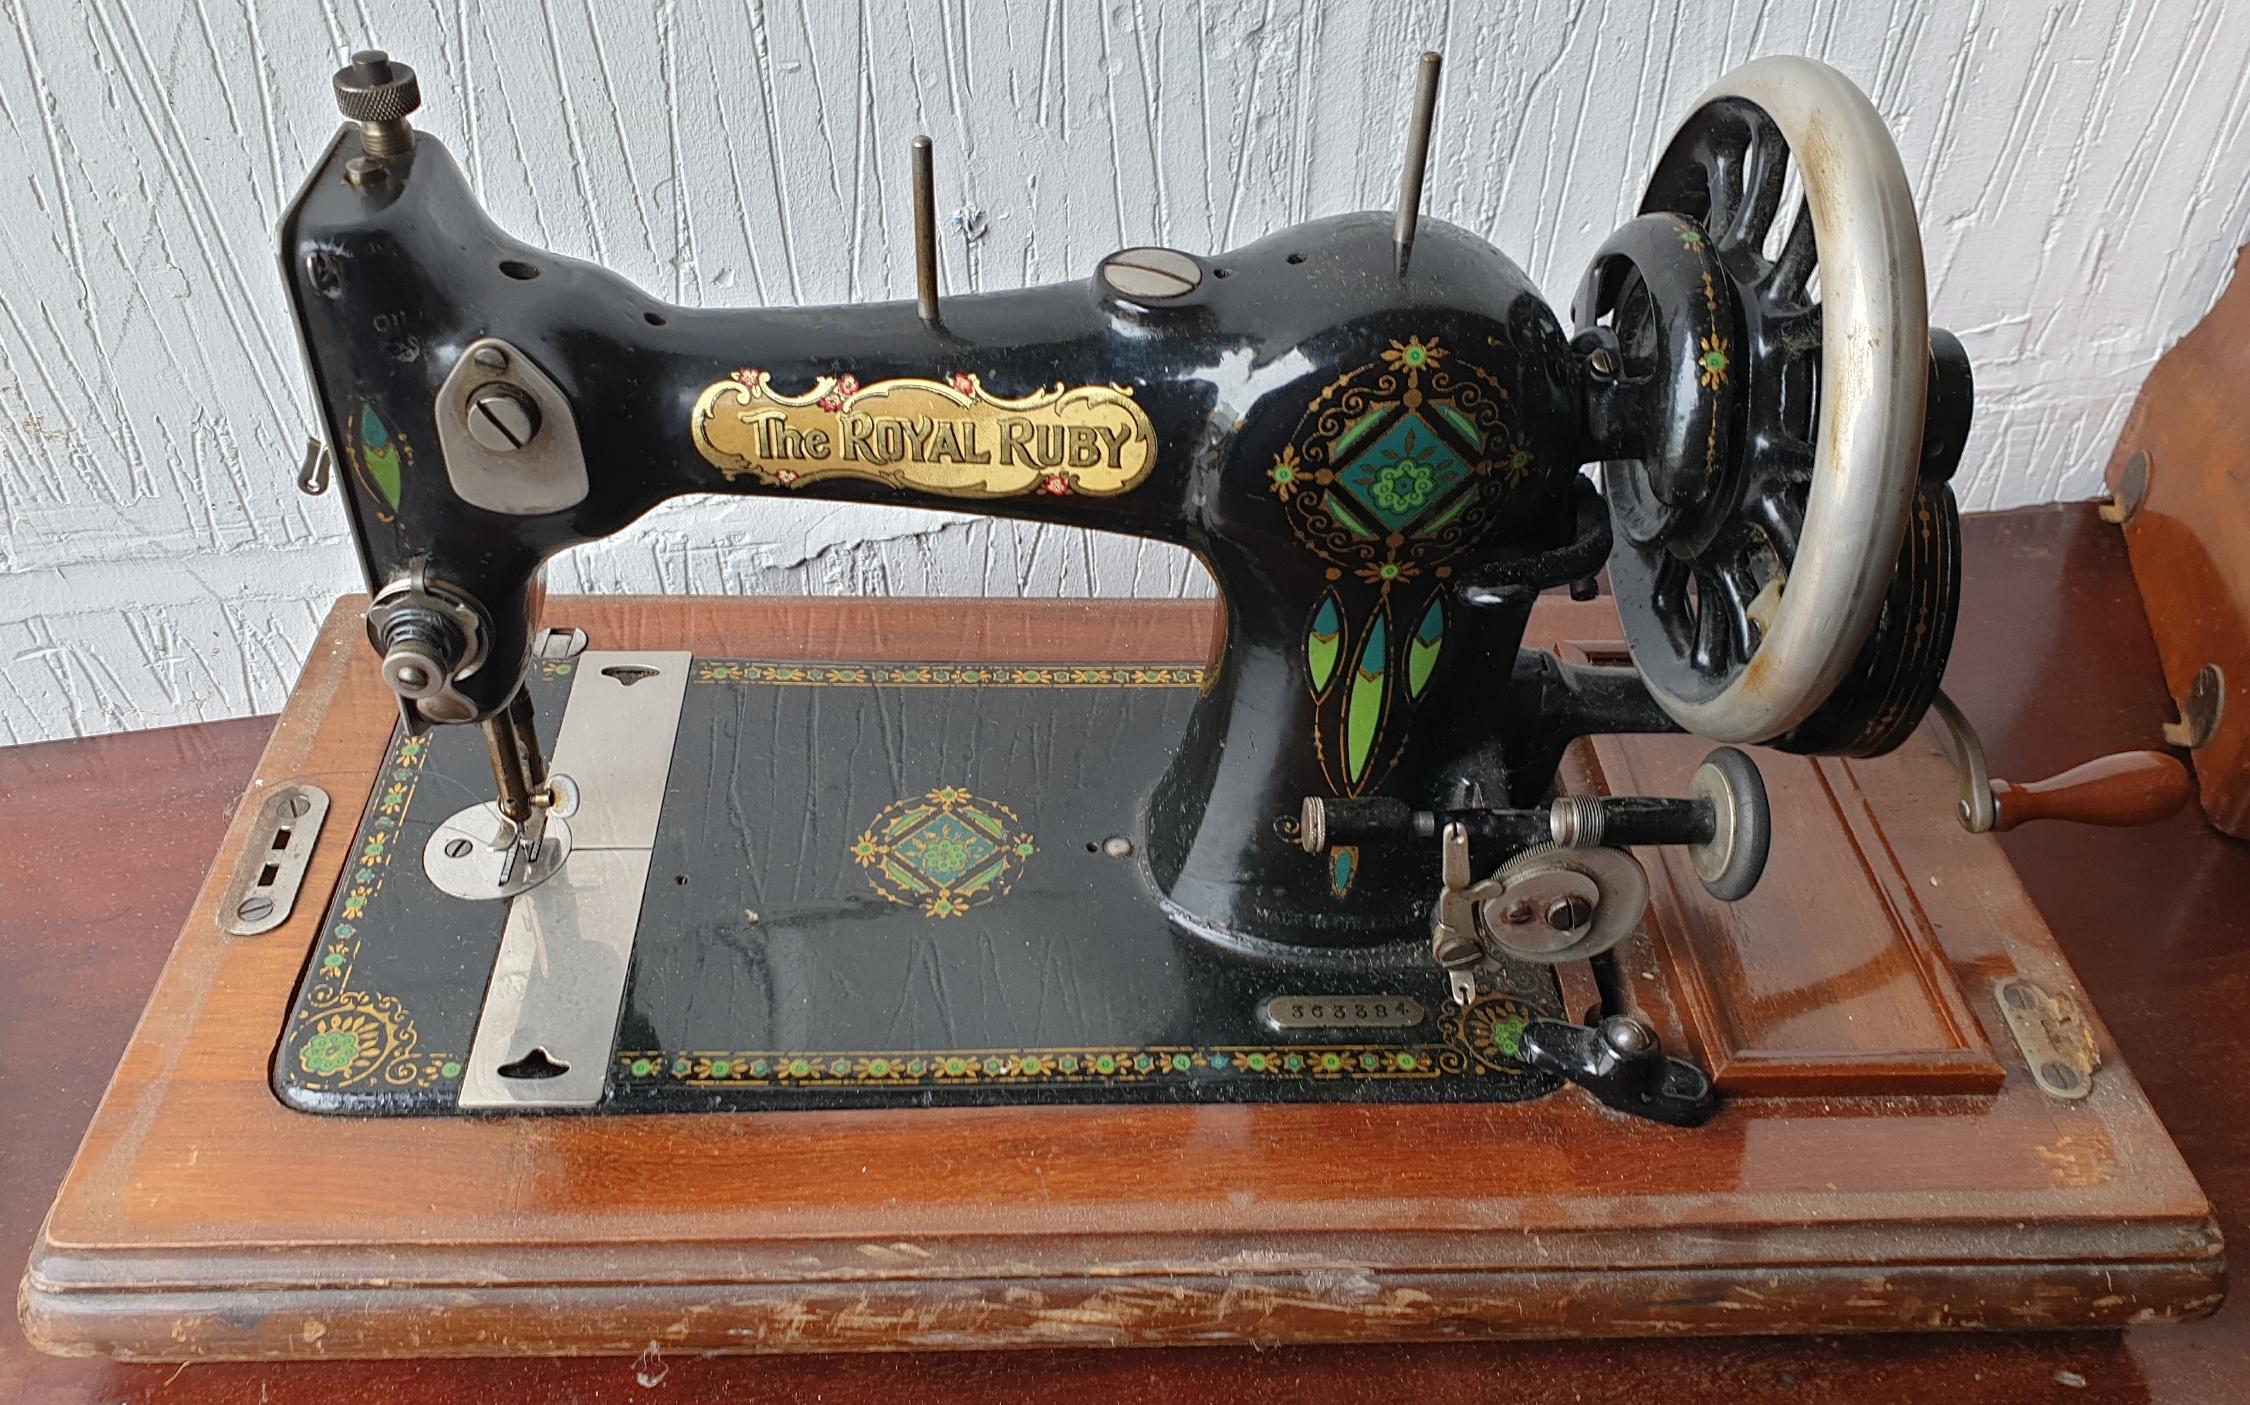 Vintage The Royal Ruby Sewing Machine - Image 2 of 5